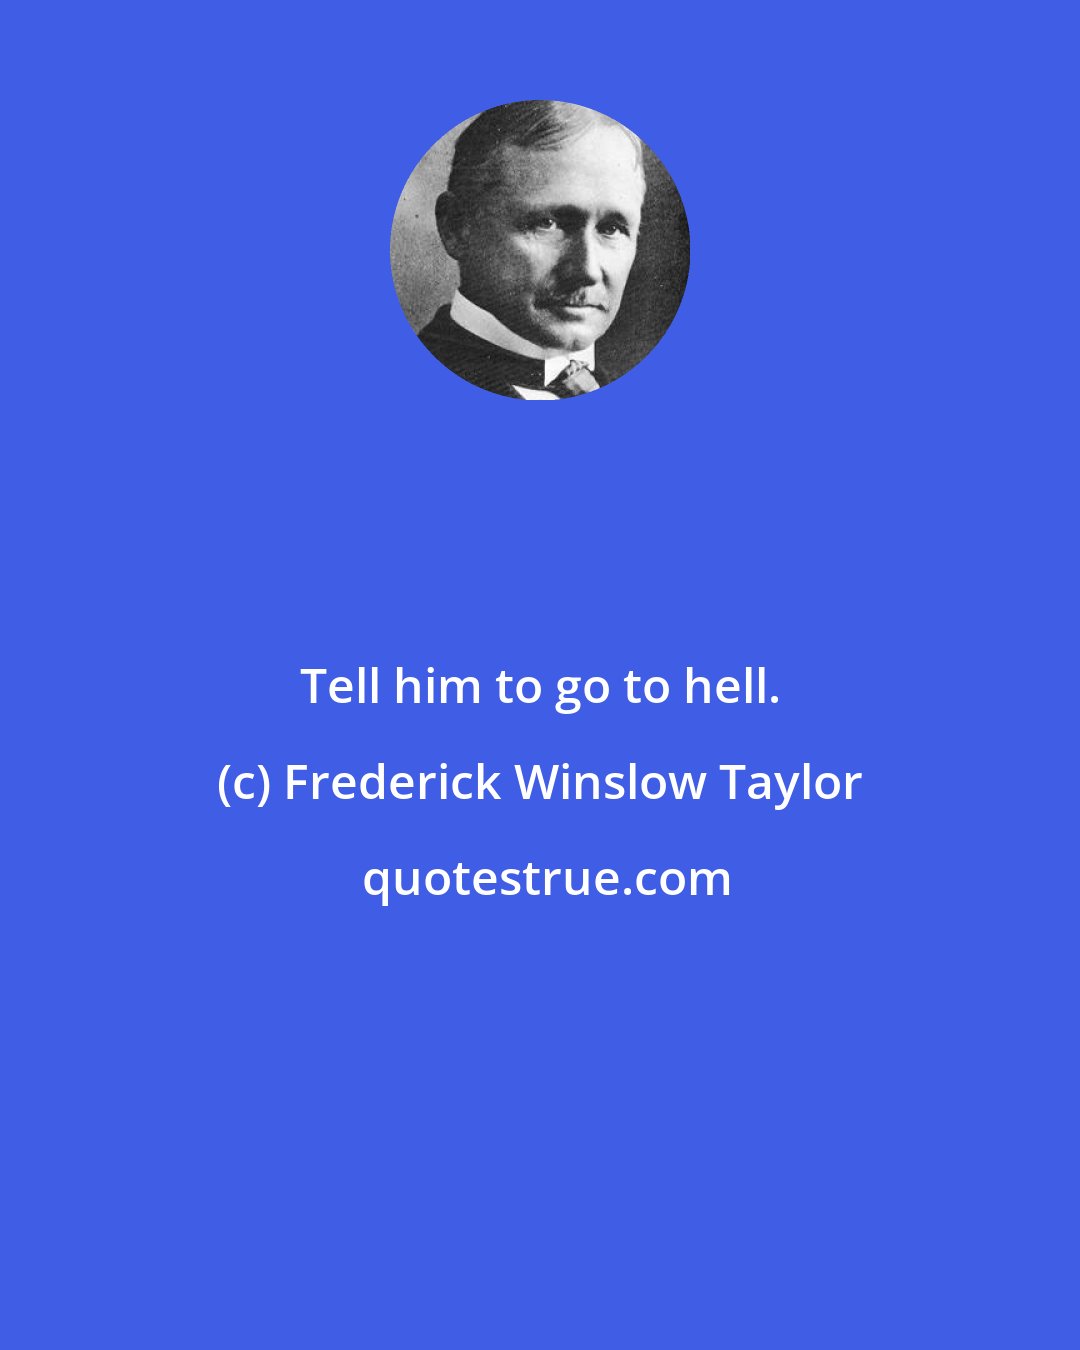 Frederick Winslow Taylor: Tell him to go to hell.